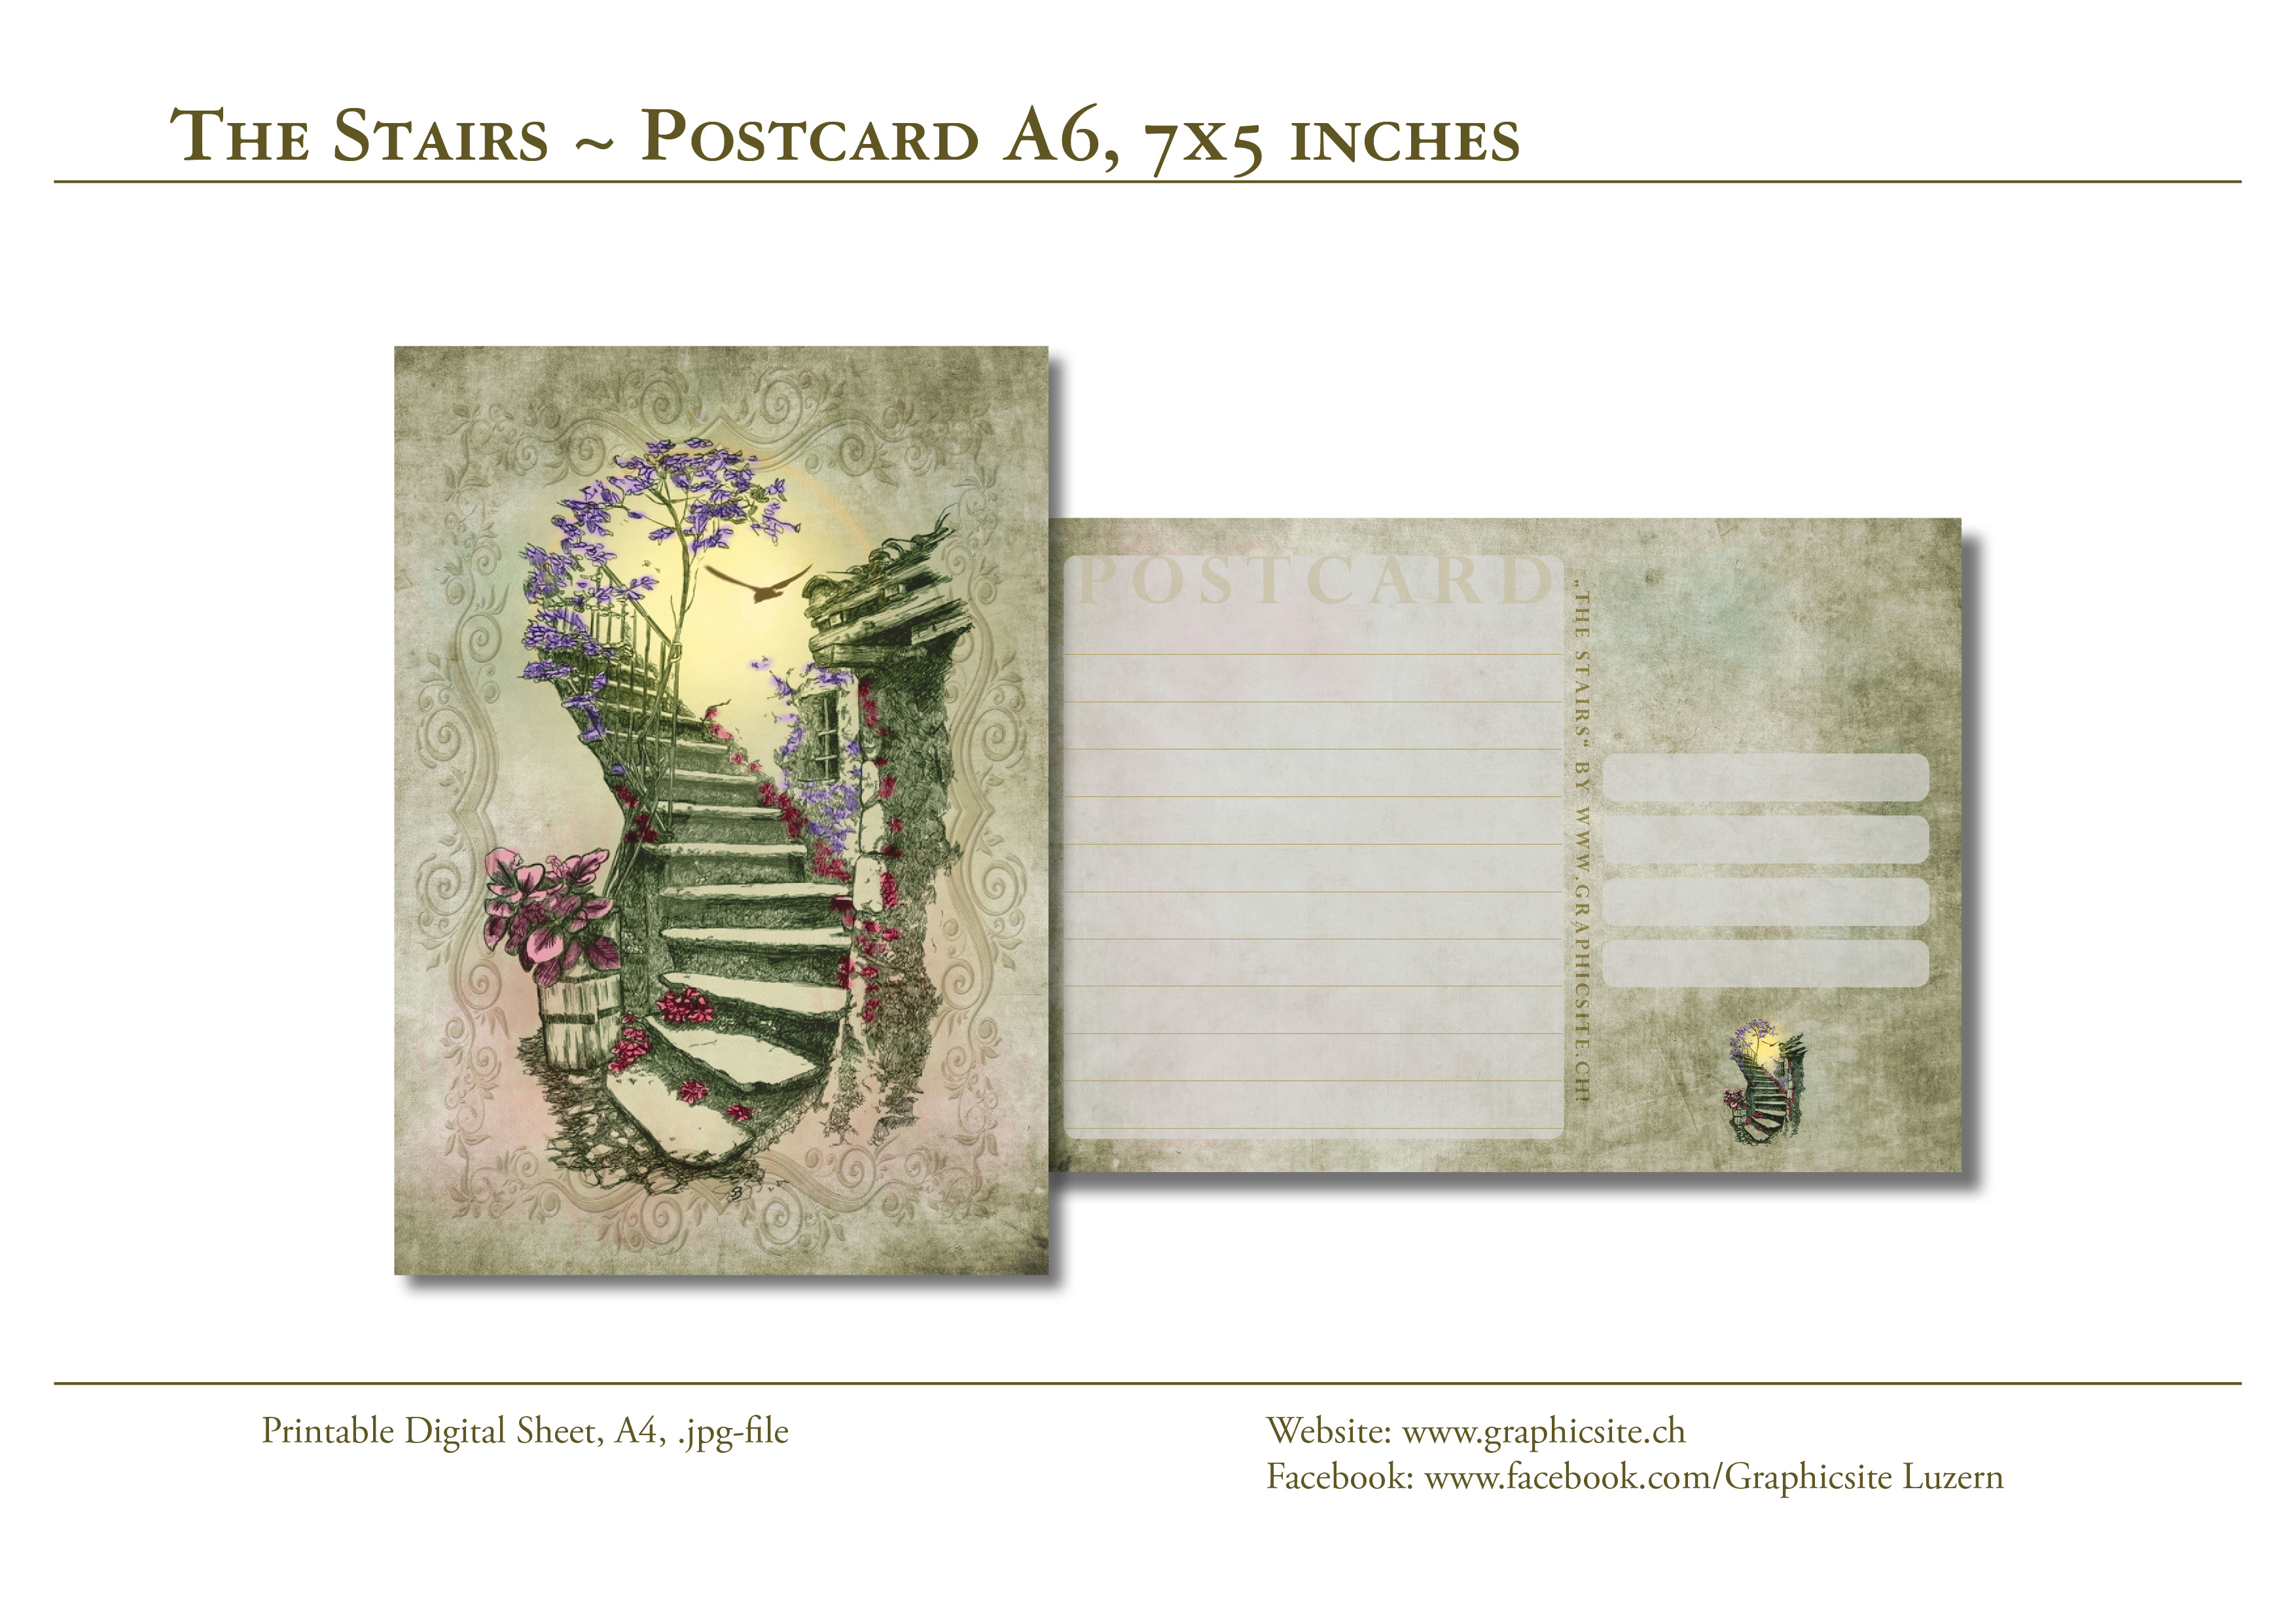 Printable Digital Sheets, Postcard A6, Architecture, Stairs, flowers, 